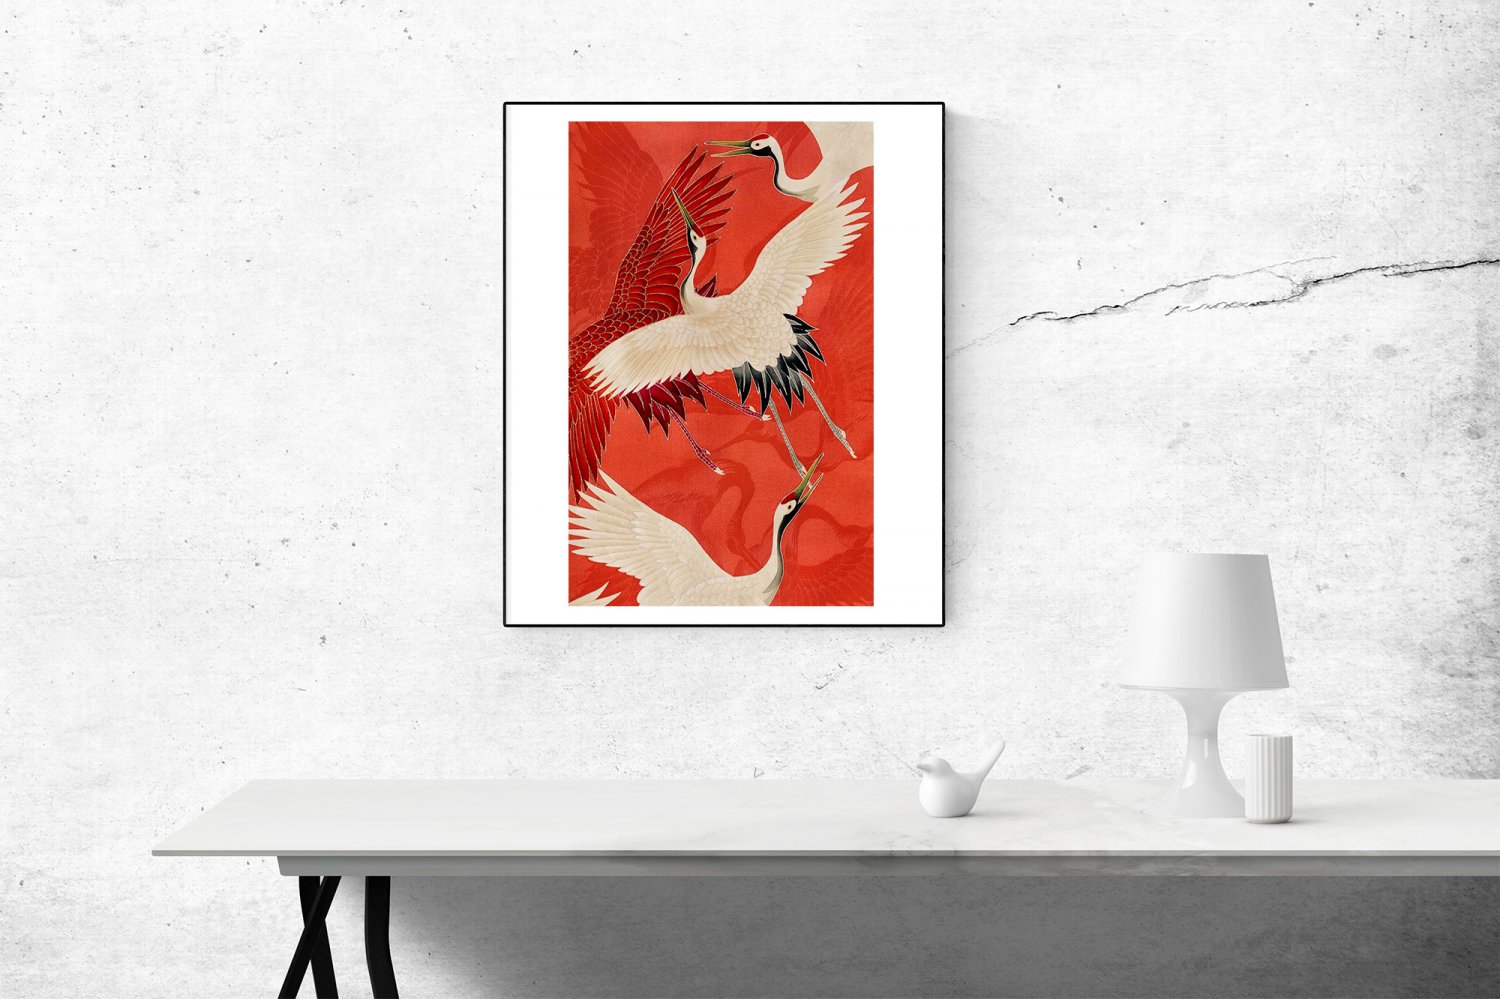 Red Cranes Vintage Japanese Art  13"x19" (32cm/49cm) Polyester Fabric Poster